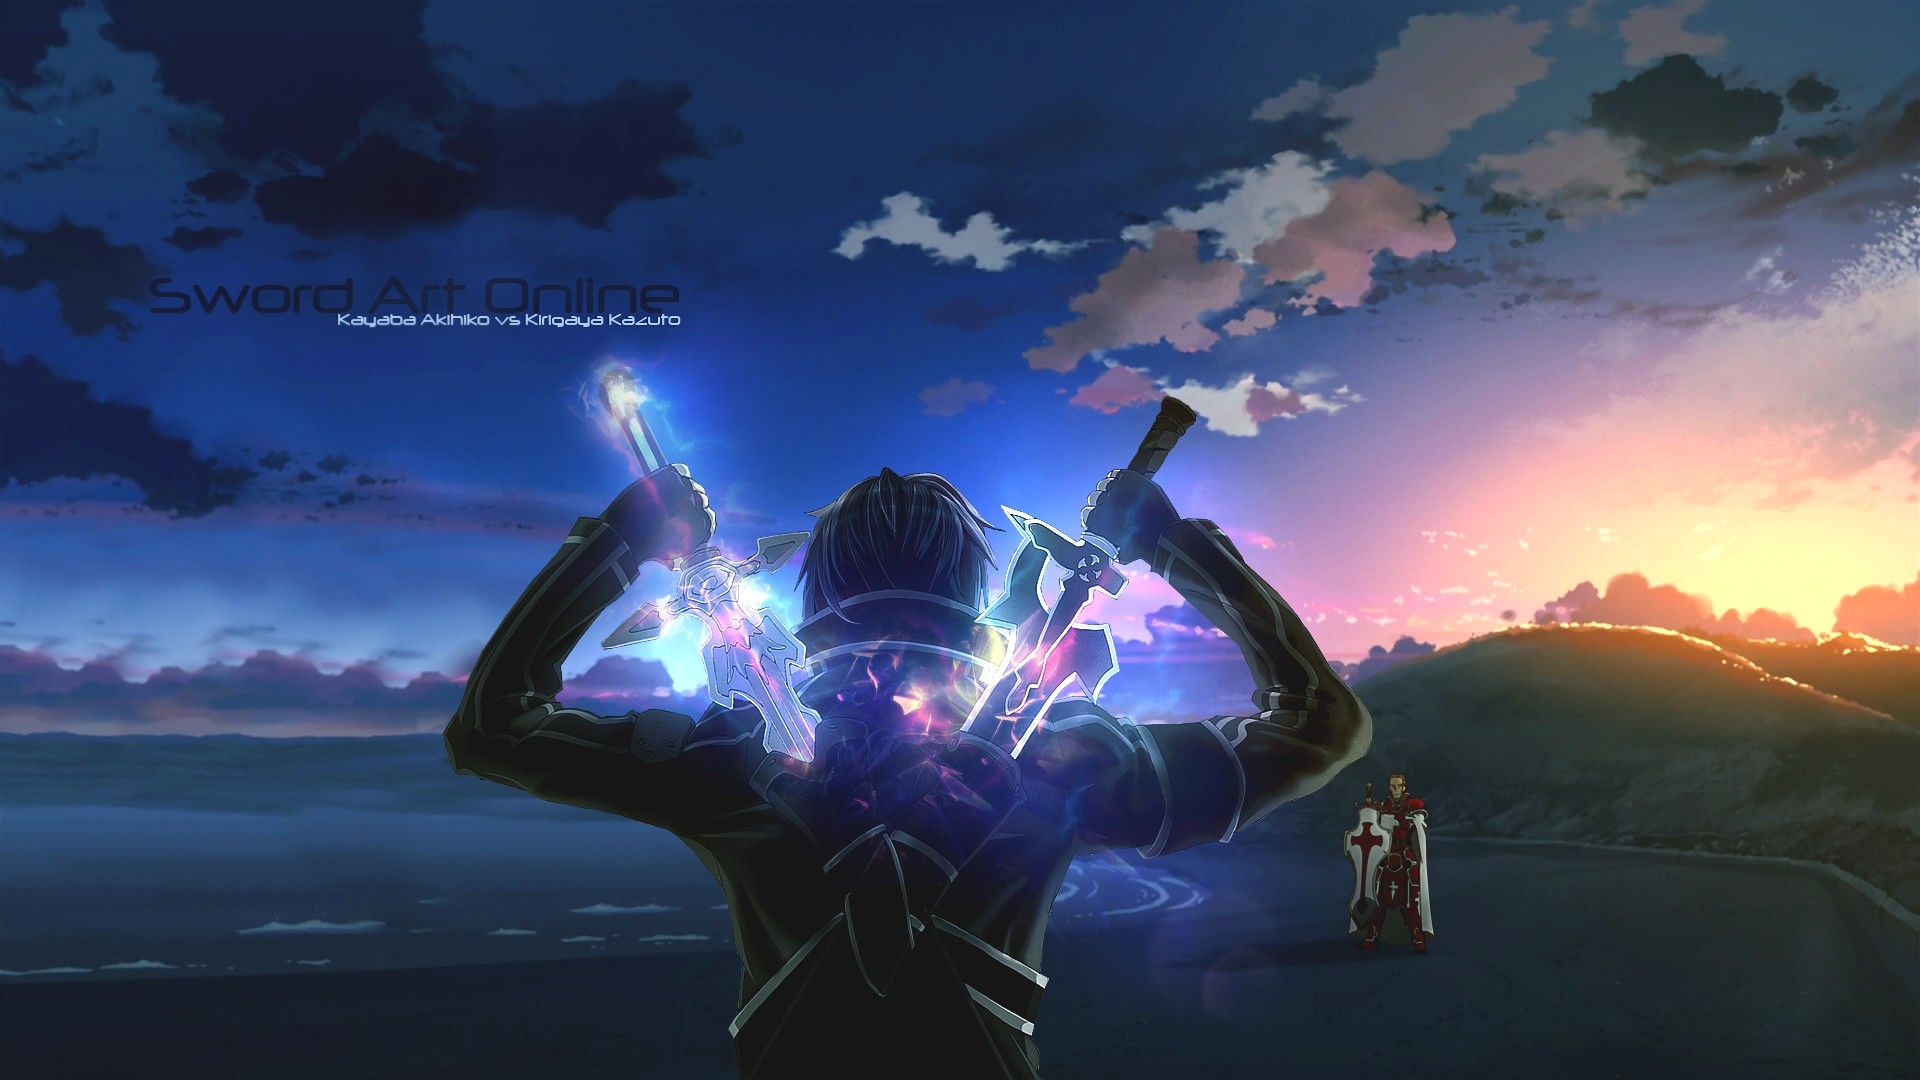 2700+ Sword Art Online HD Wallpapers and Backgrounds